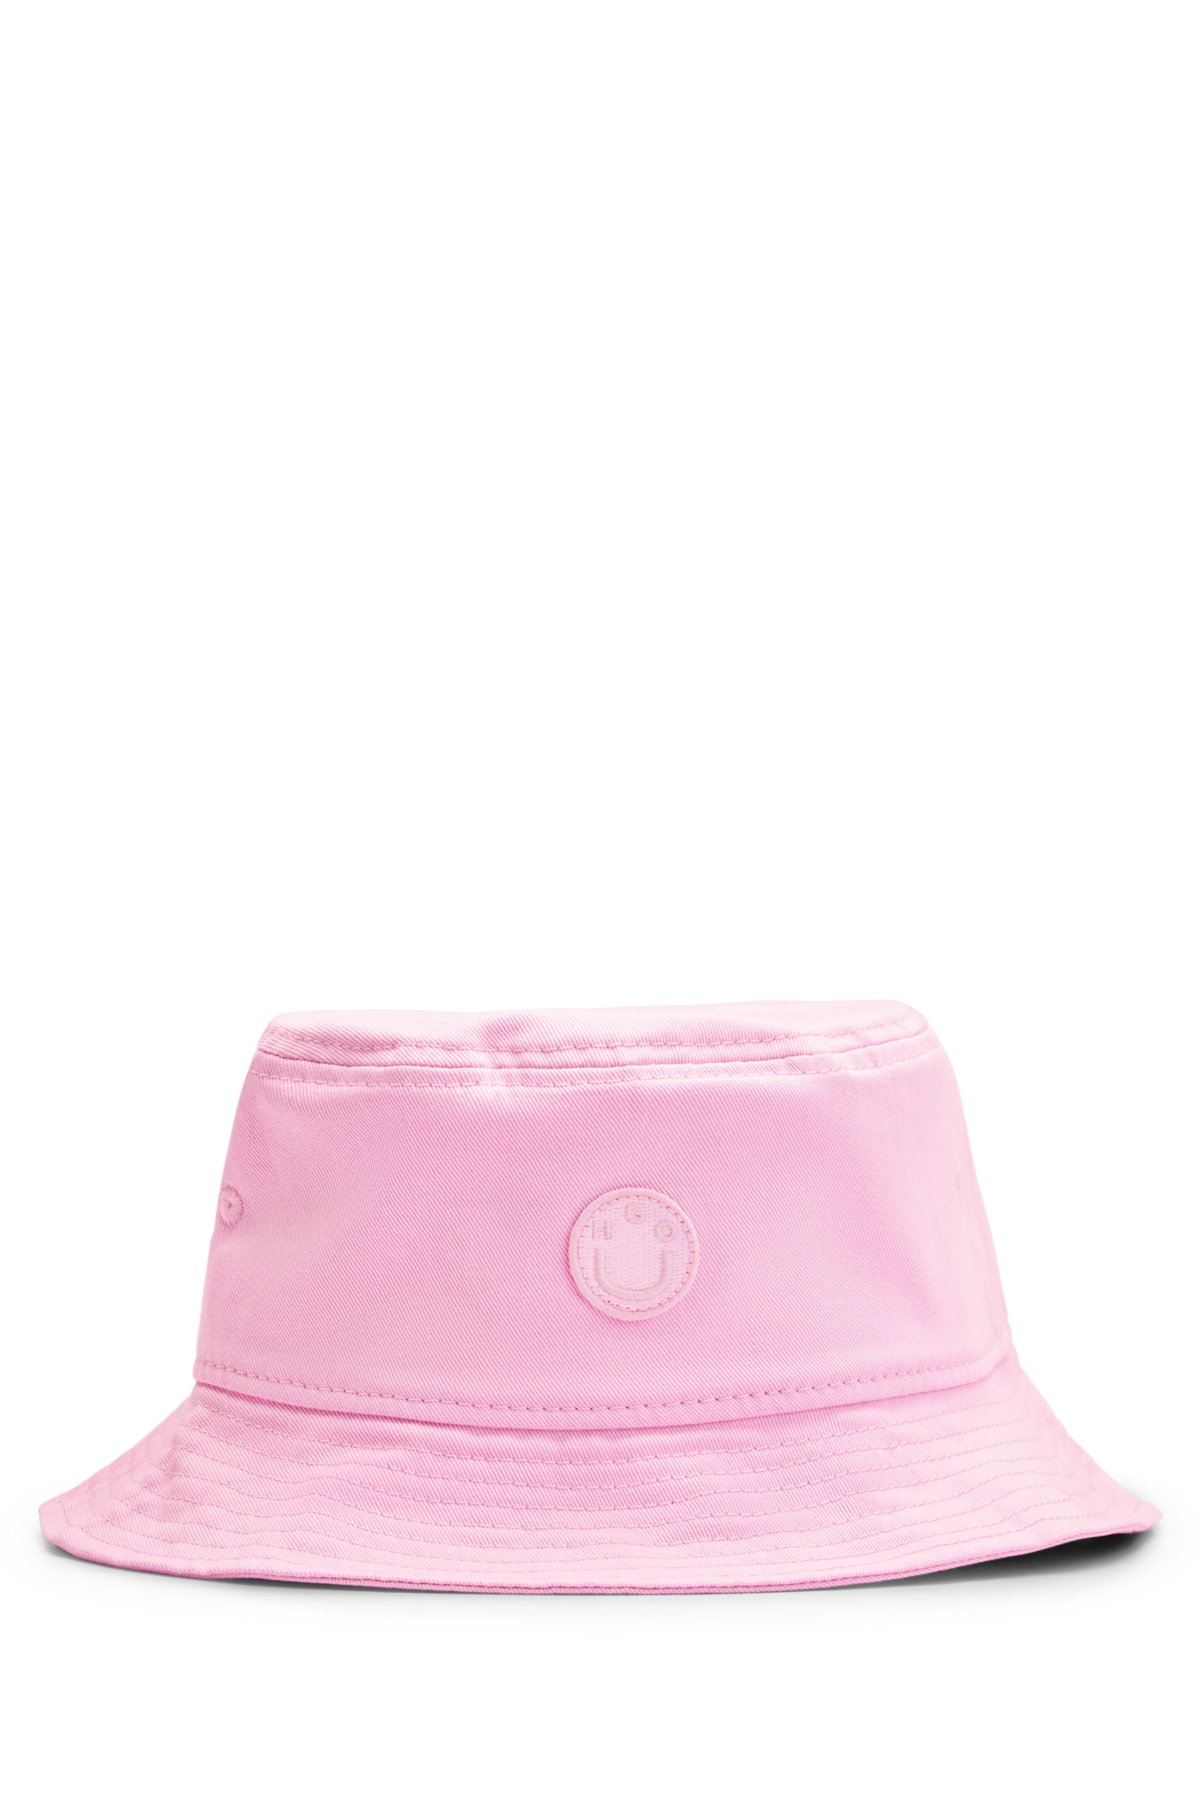 Bucket hat in cotton twill with embroidered logo, light pink